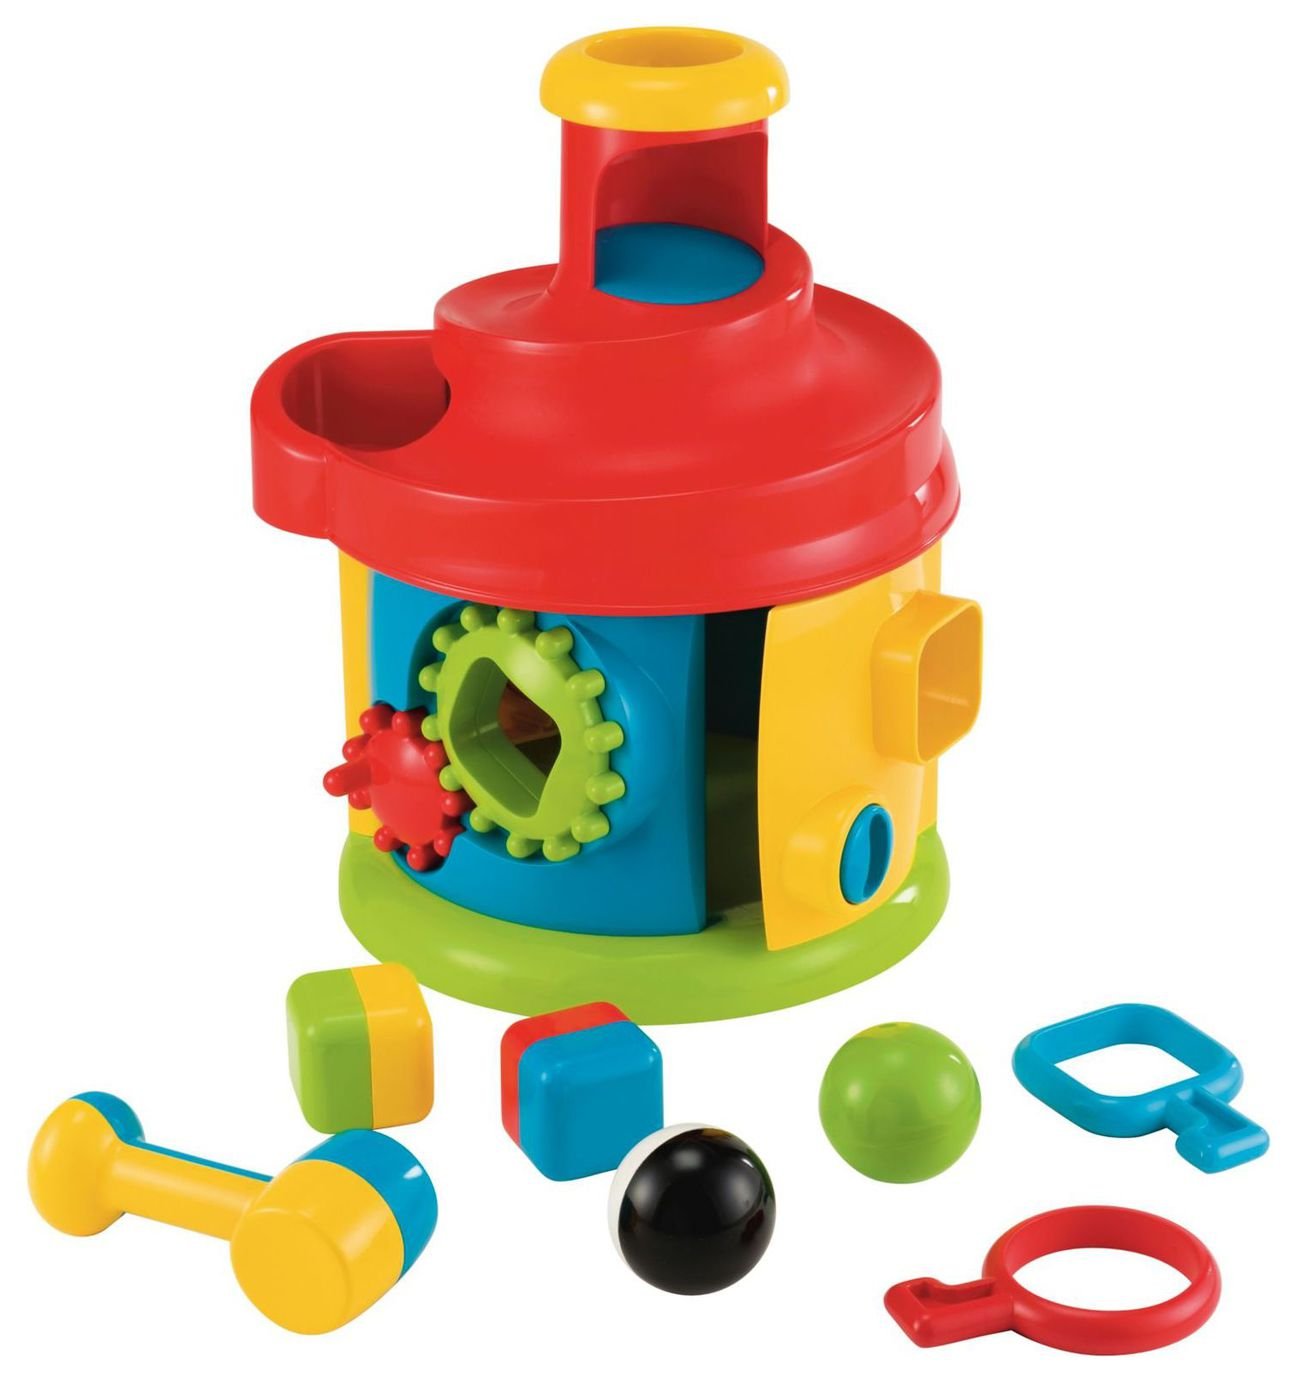 ELC Twist and Turn Activity House